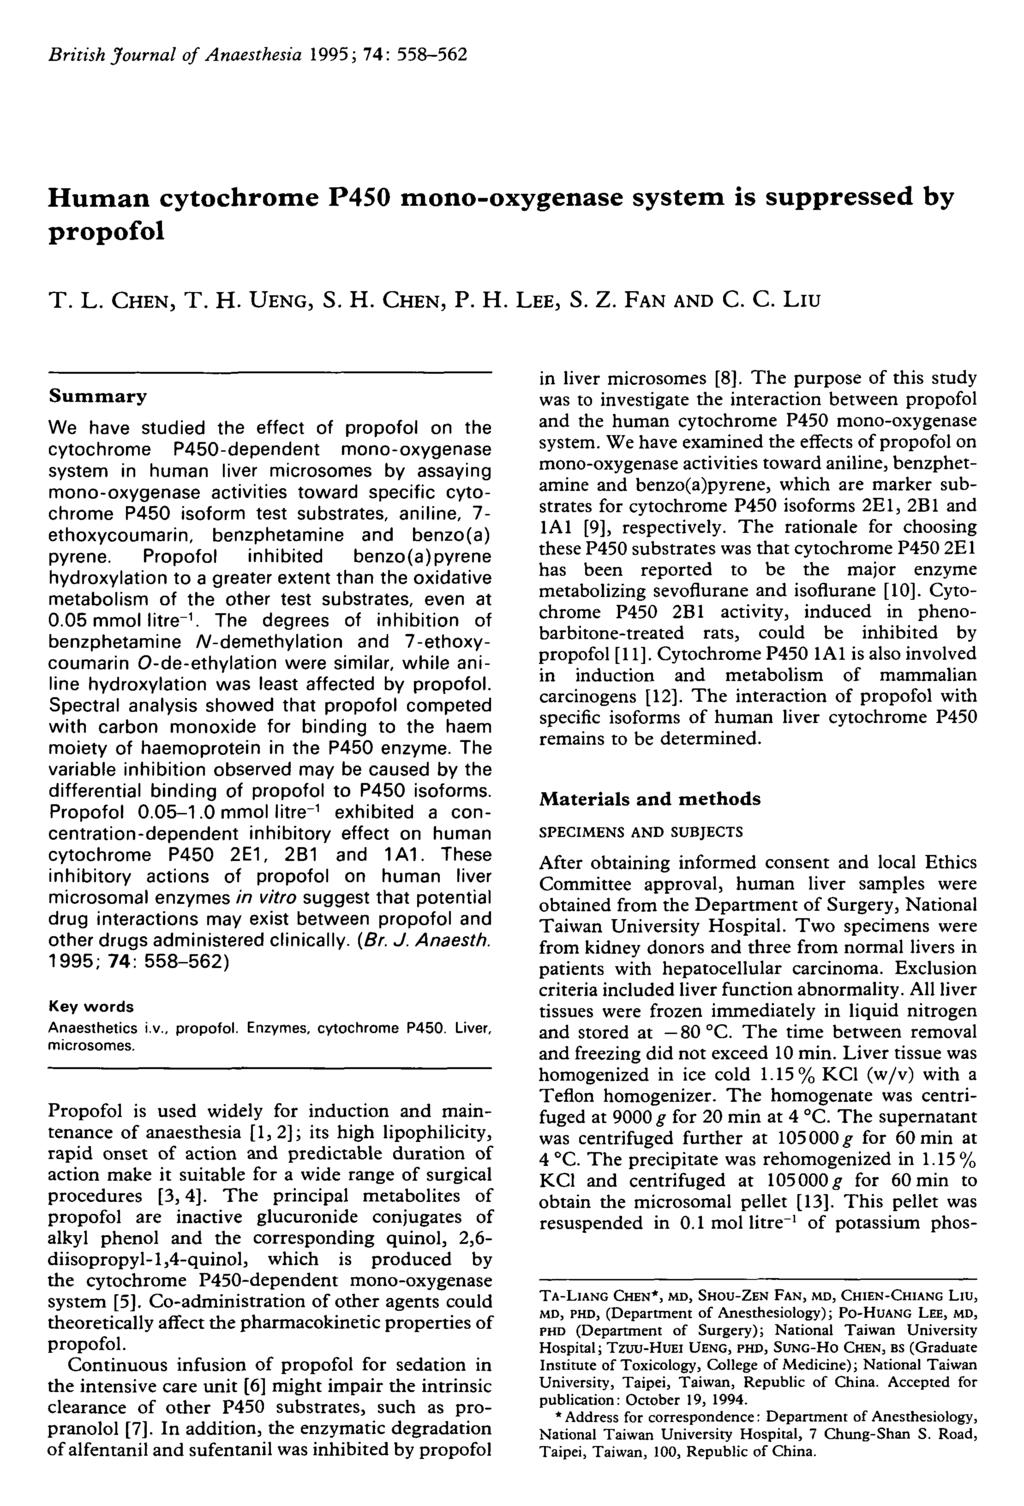 British Journal of Anaesthesia 1995; 74: 558-562 Human cytochrome P450 mono-oxygenase system is suppressed by propofol T. L. CH